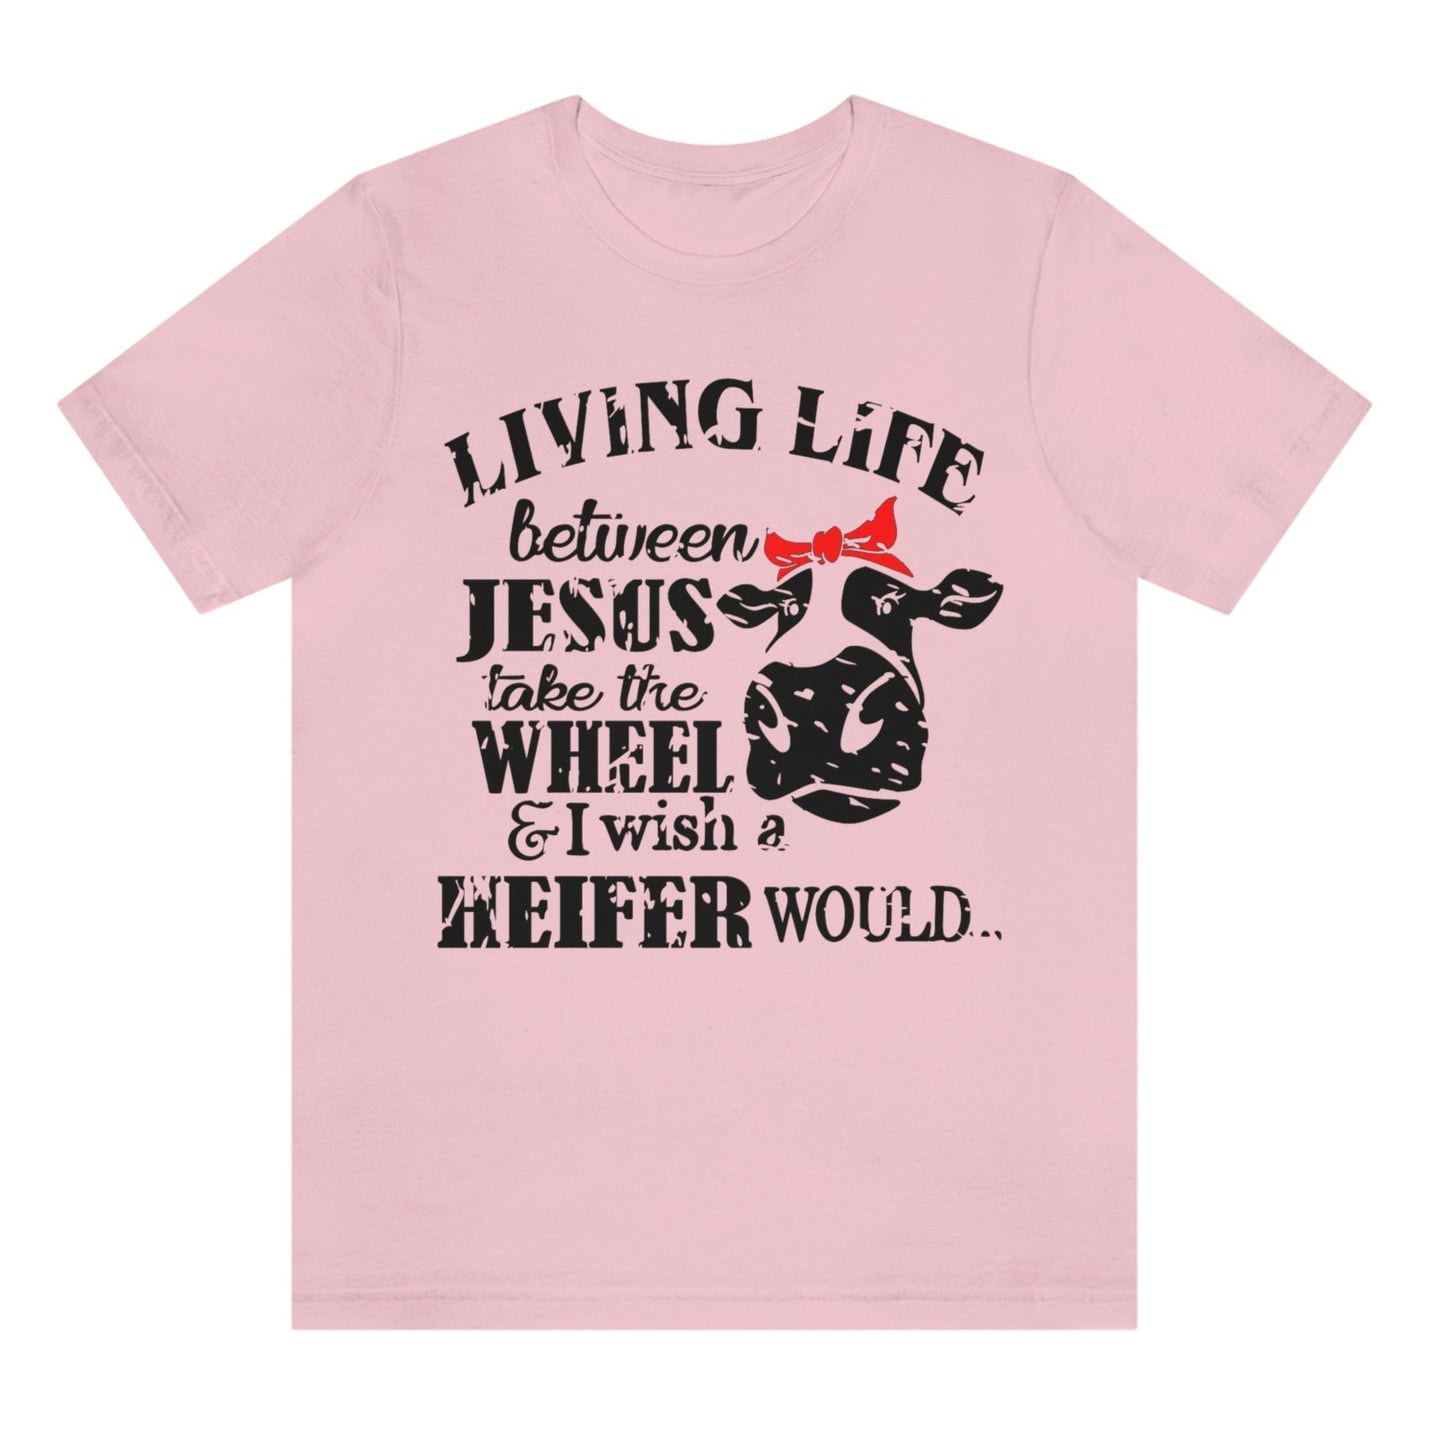 living-life-between-jesus-take-the-wheel-and-i-wish-a-heifer-would-pink-t-shirt